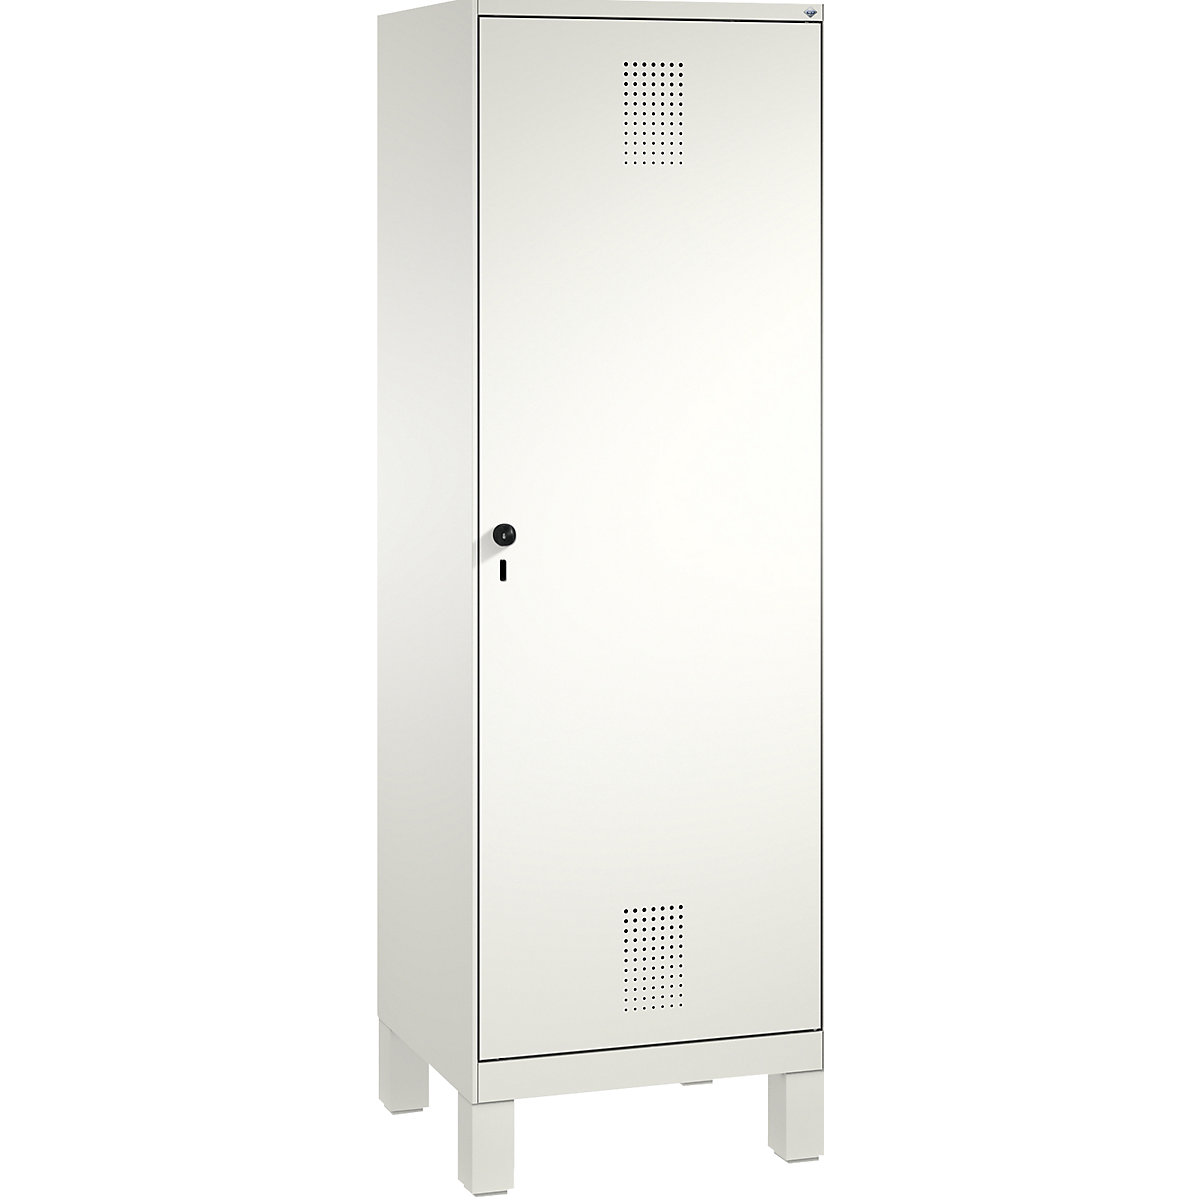 EVOLO cloakroom locker, door for 2 compartments, with feet – C+P, 2 compartments, 1 door, compartment width 300 mm, traffic white / traffic white-2